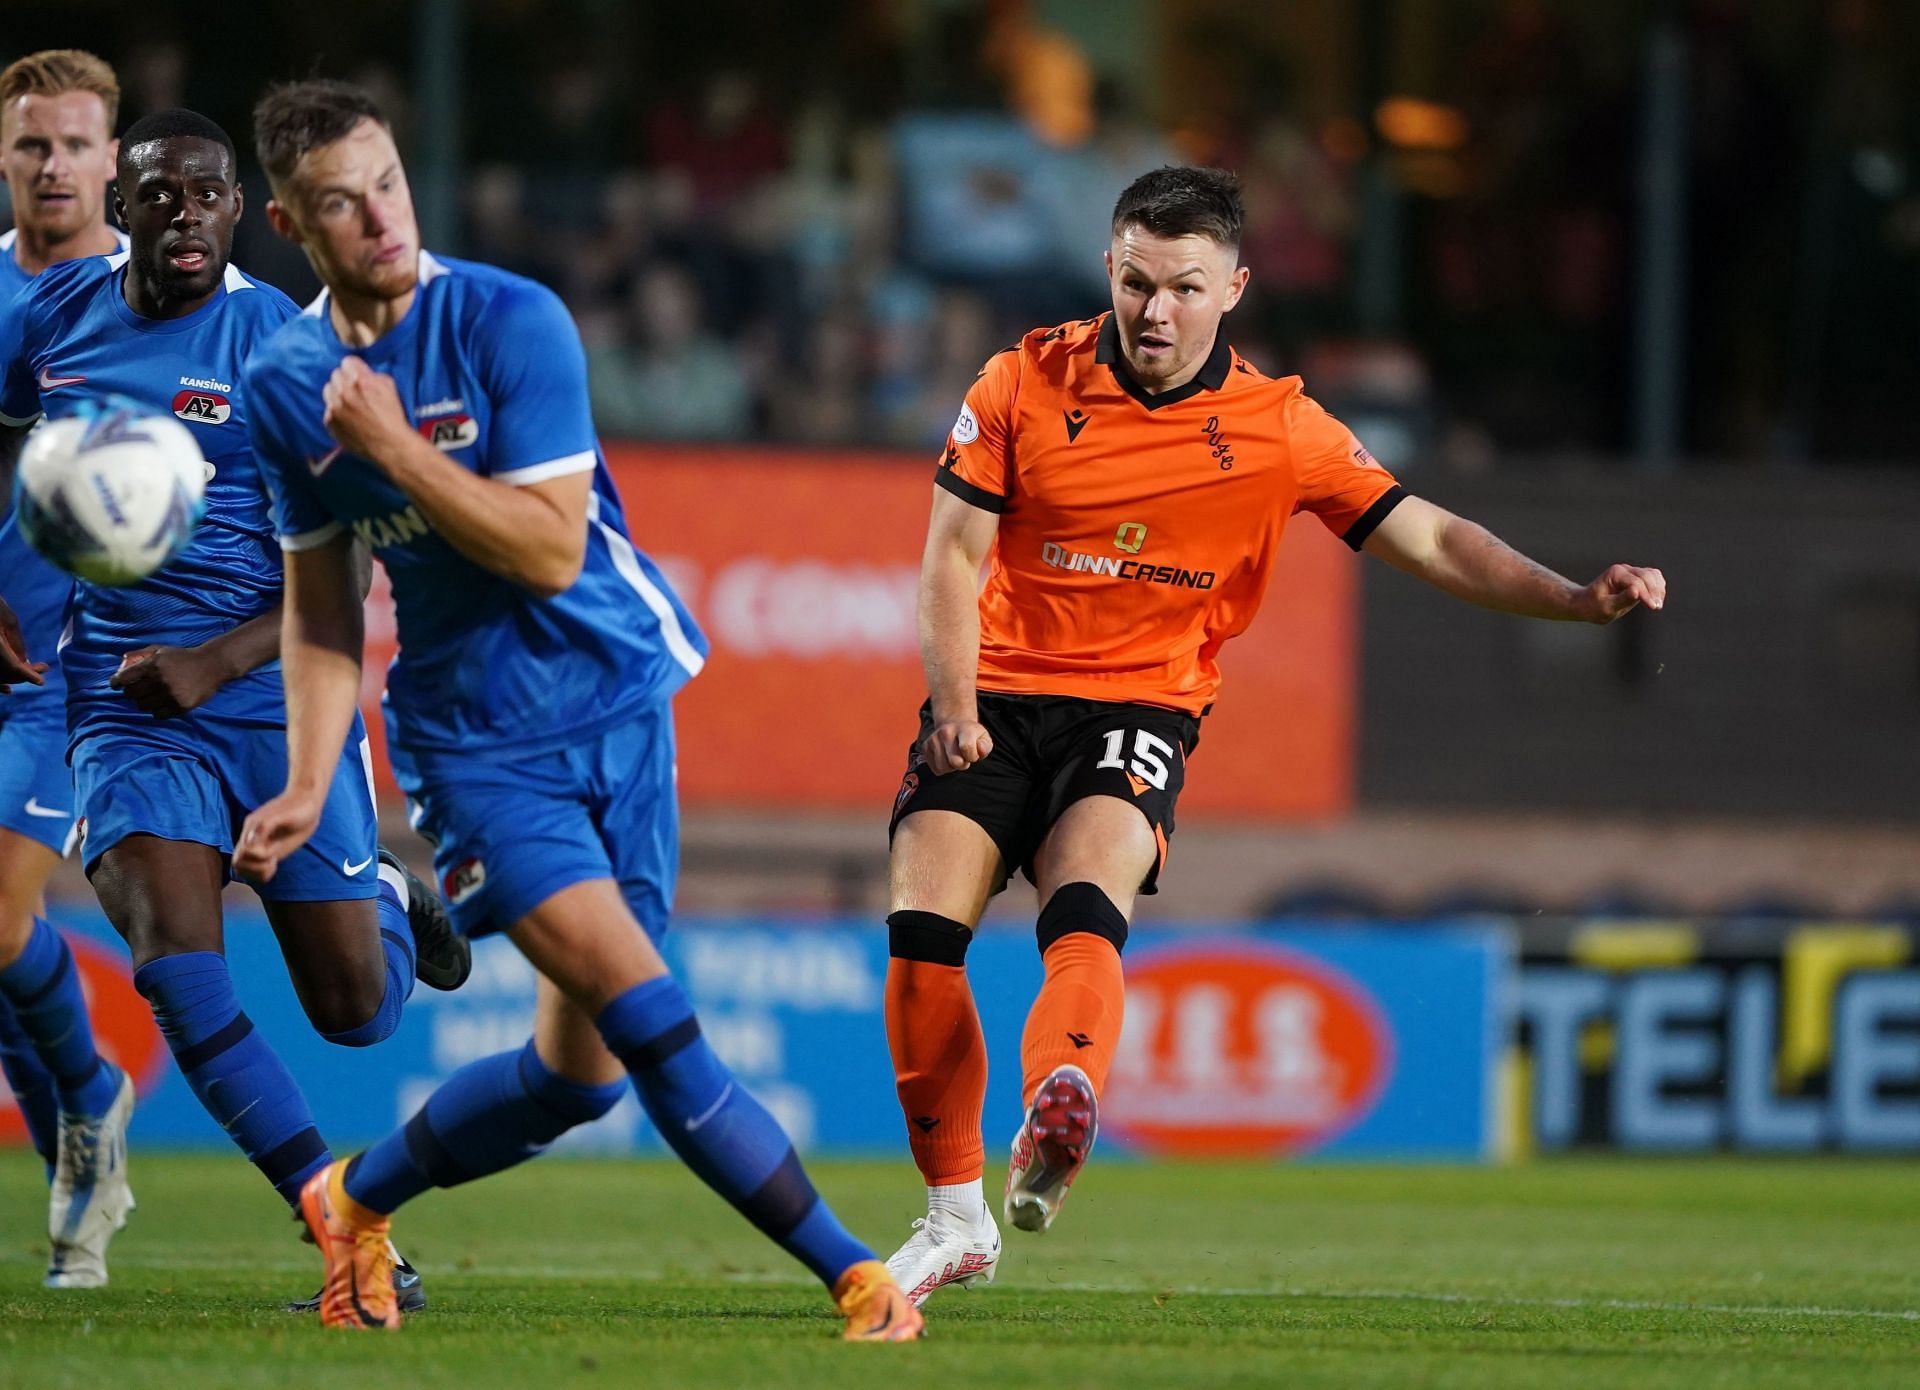 AZ Alkmaar square off against Dundee United in their Conference League qualifier on Thursday